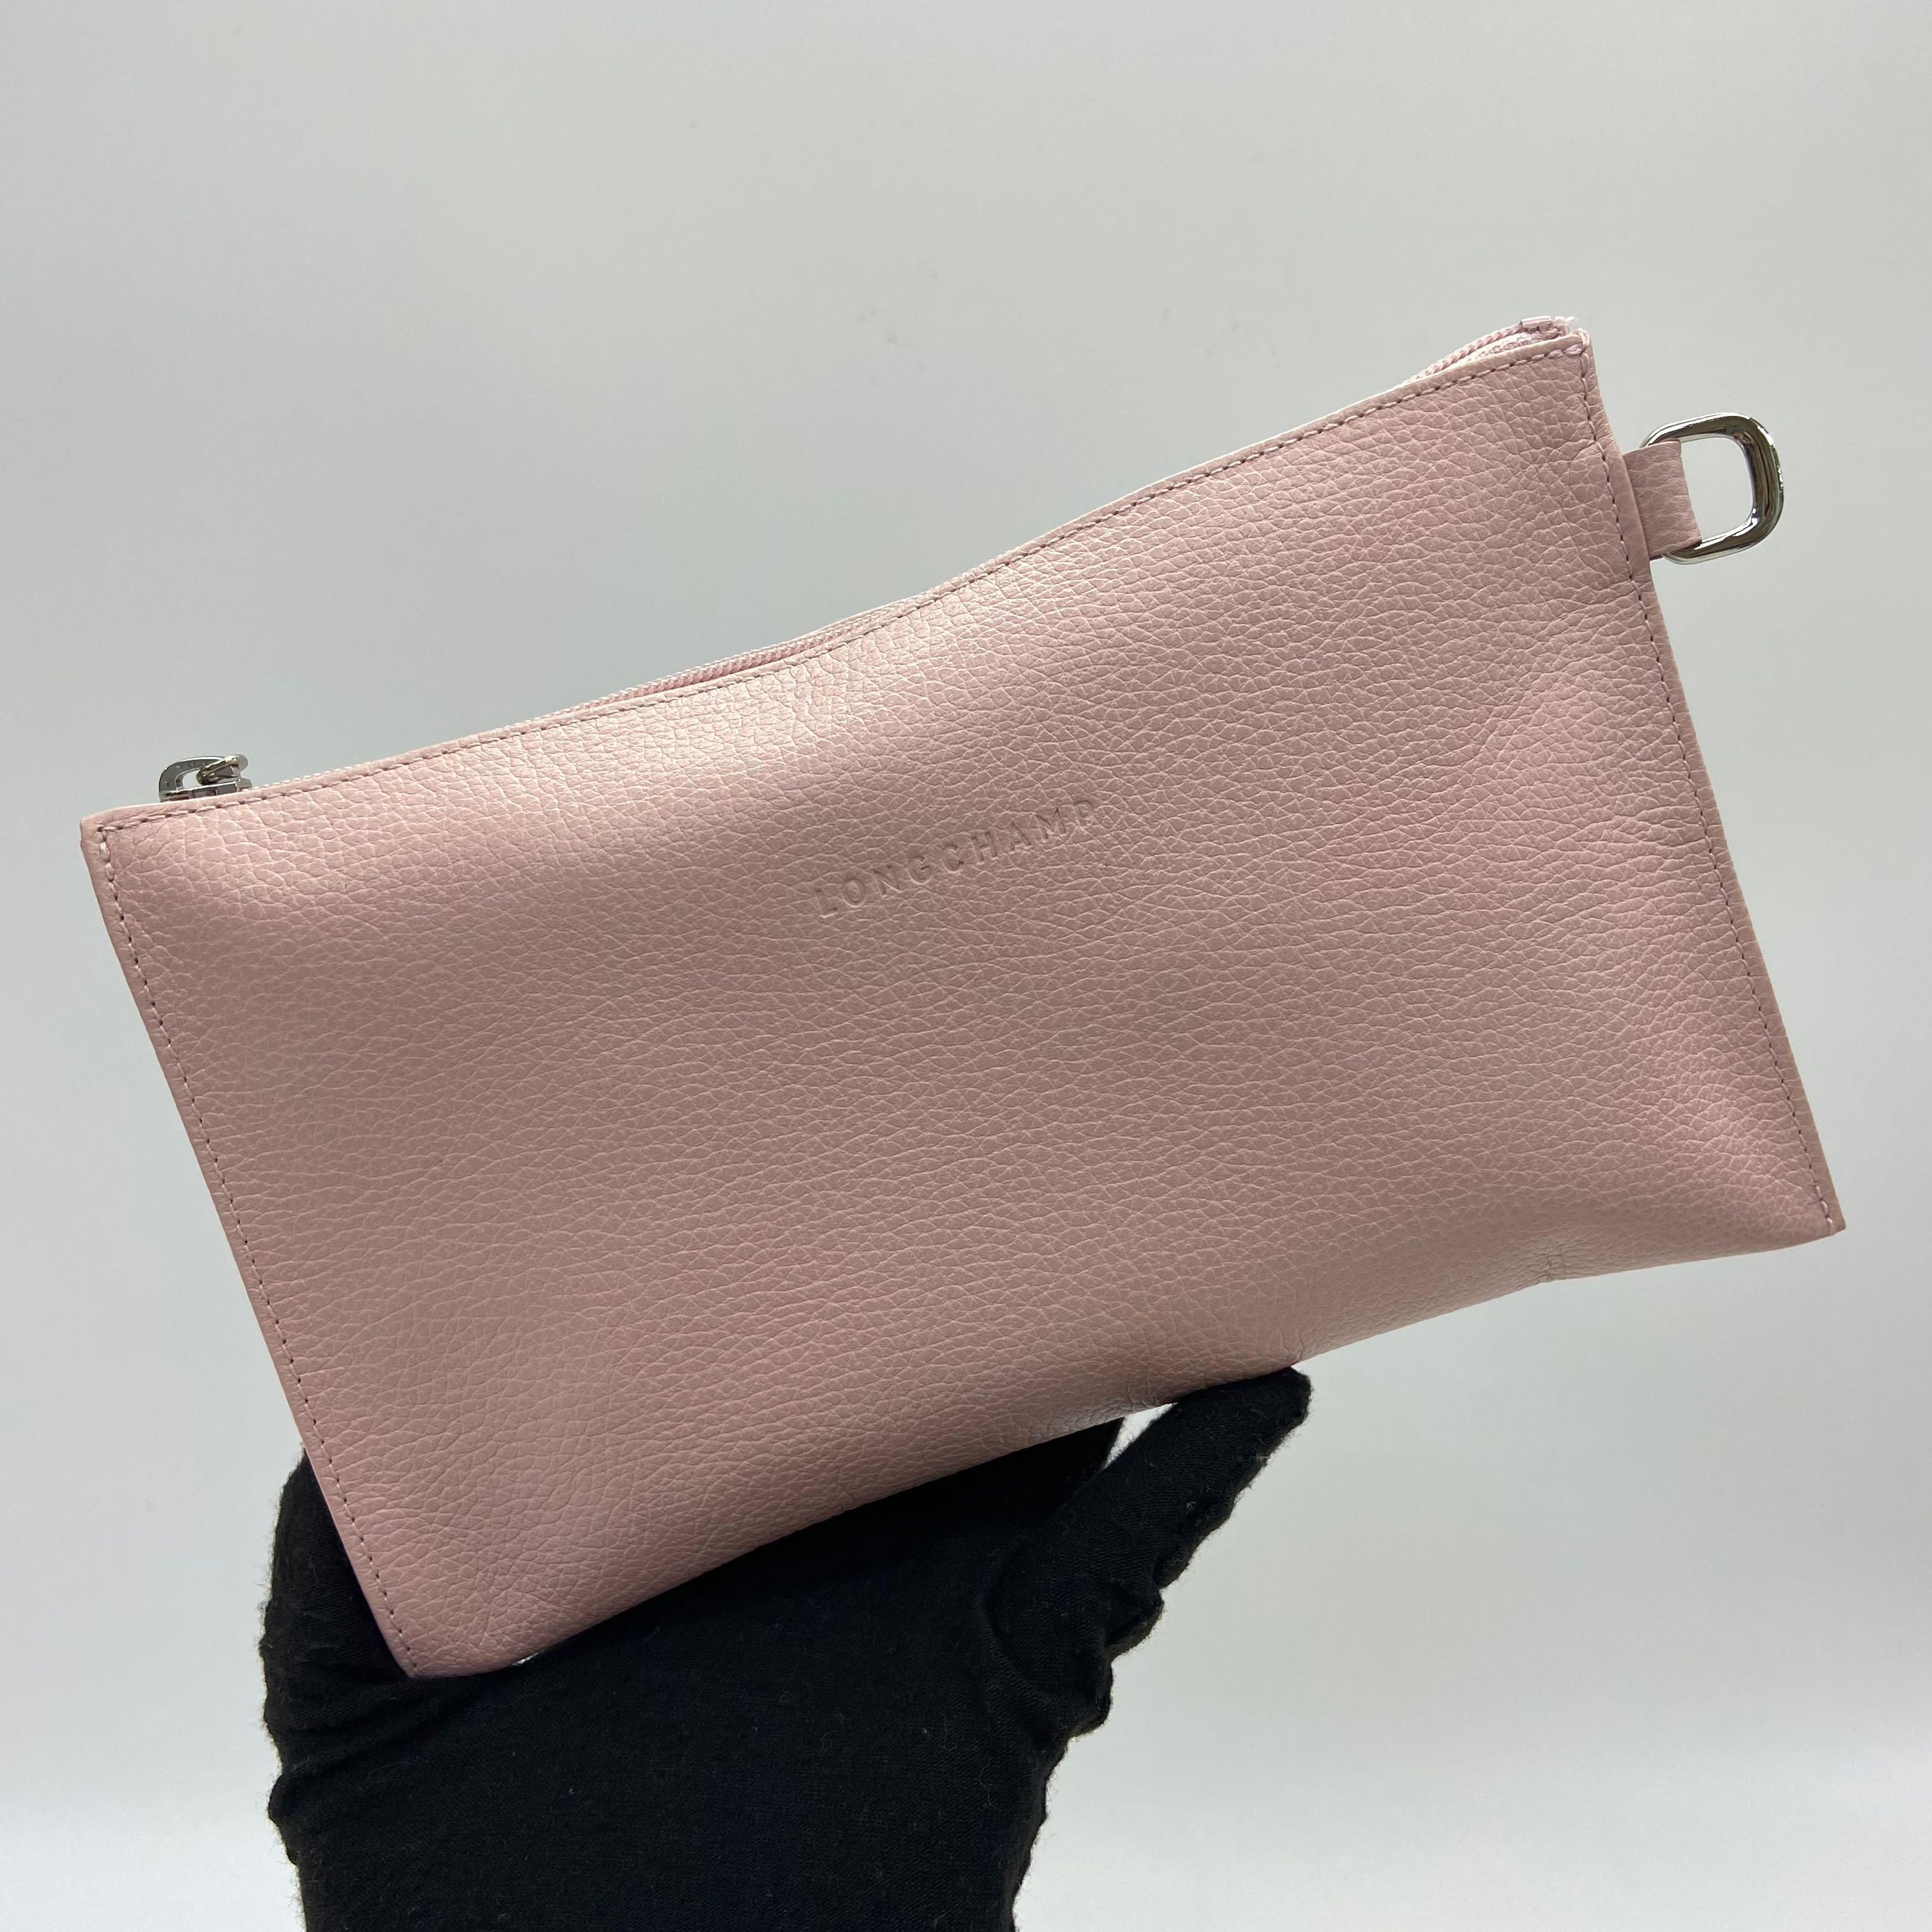 Zipengo GM Chaine d'Ancre toiletry pouch